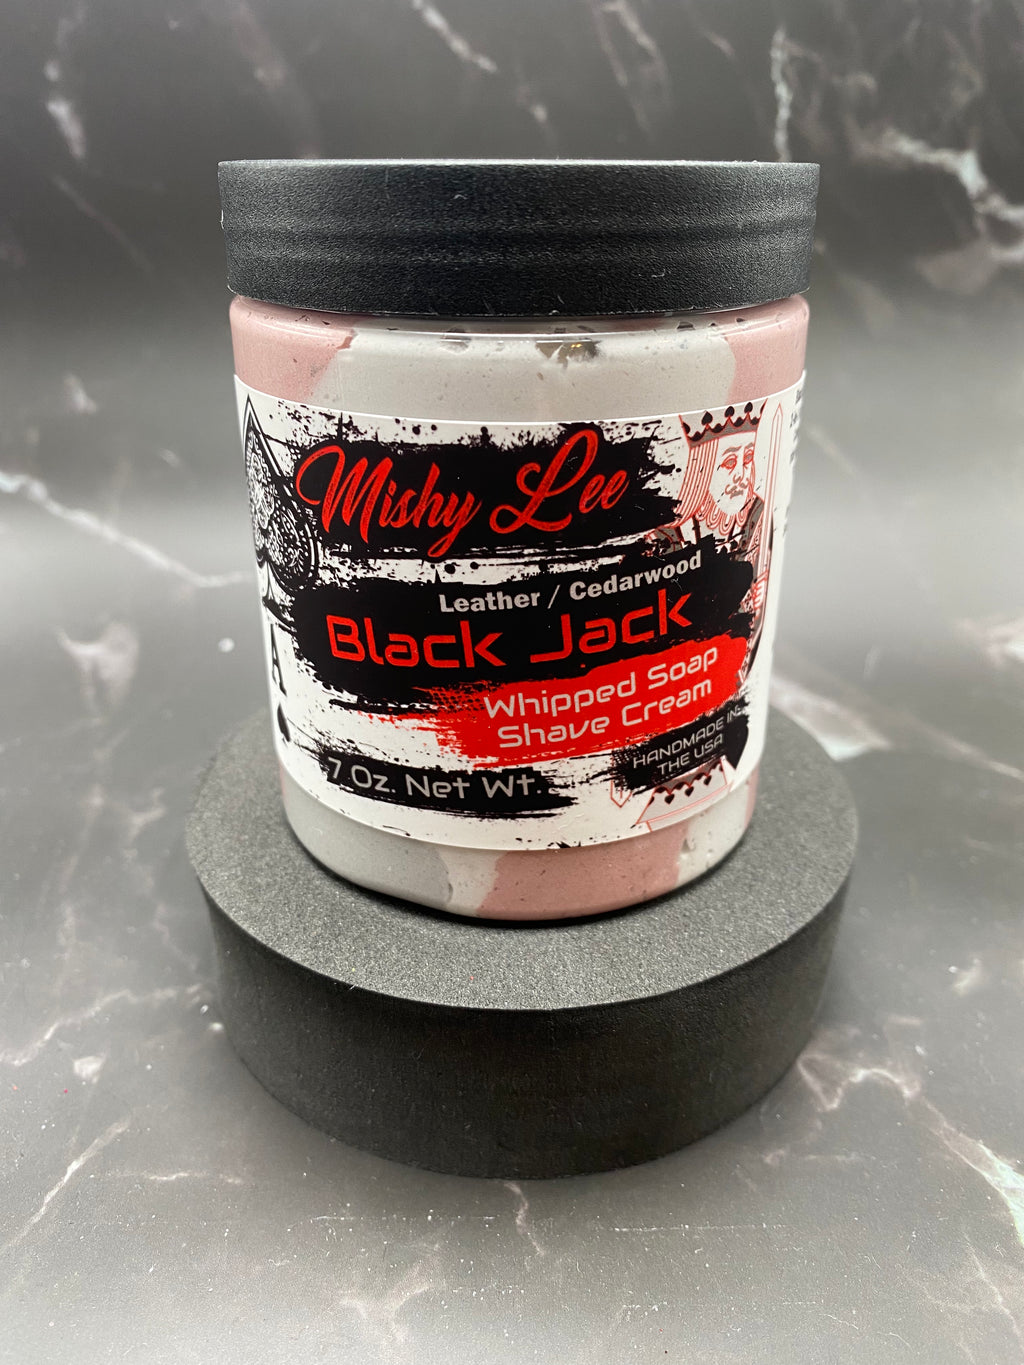 Black Jack Whipped Soap and Shave - 7 Oz.